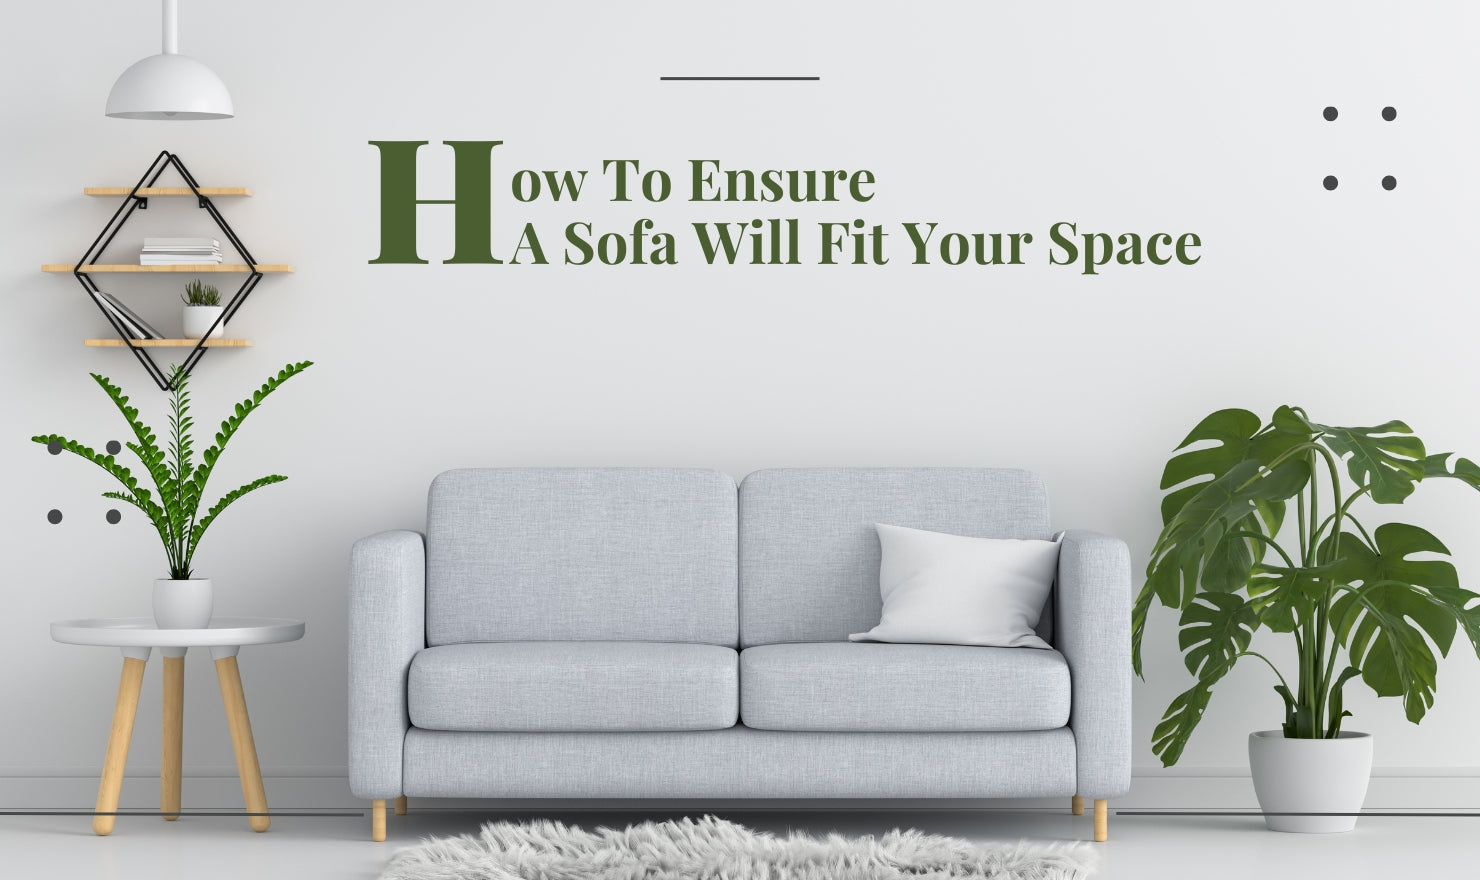 How To Ensure A Sofa Will Fit Your Space